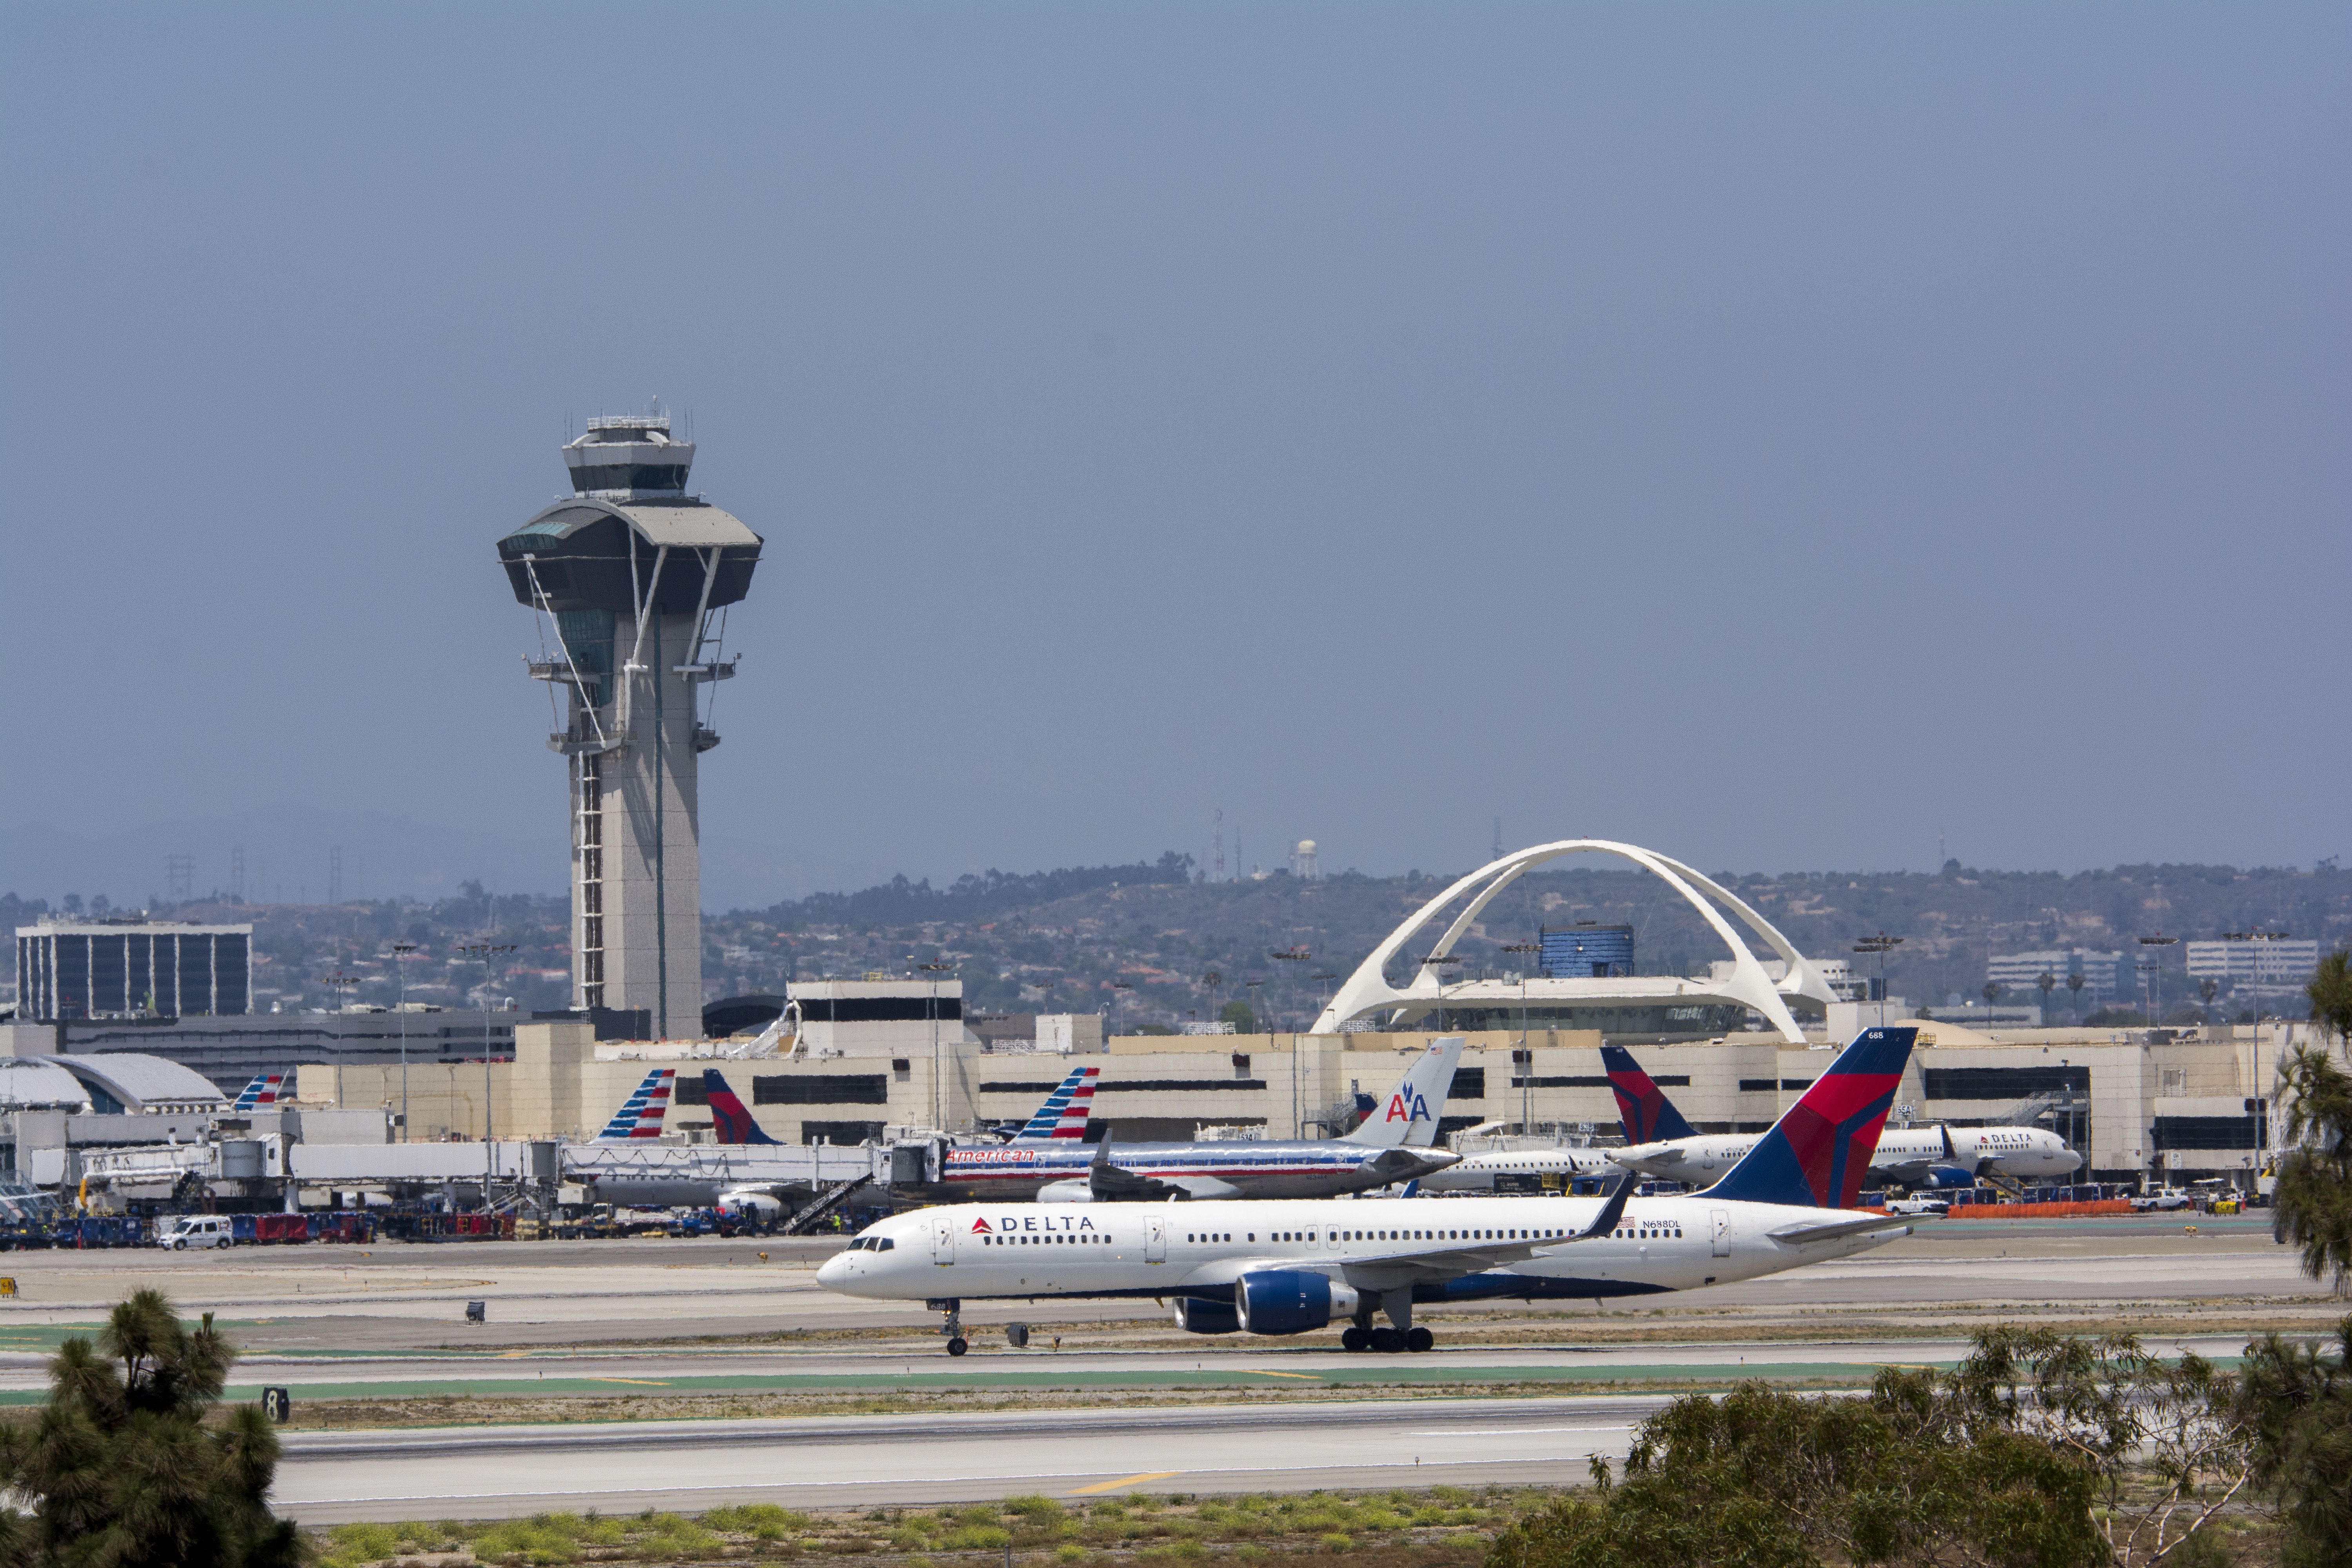 A Delta Air Lines Boeing 757 on the apron at LAX.